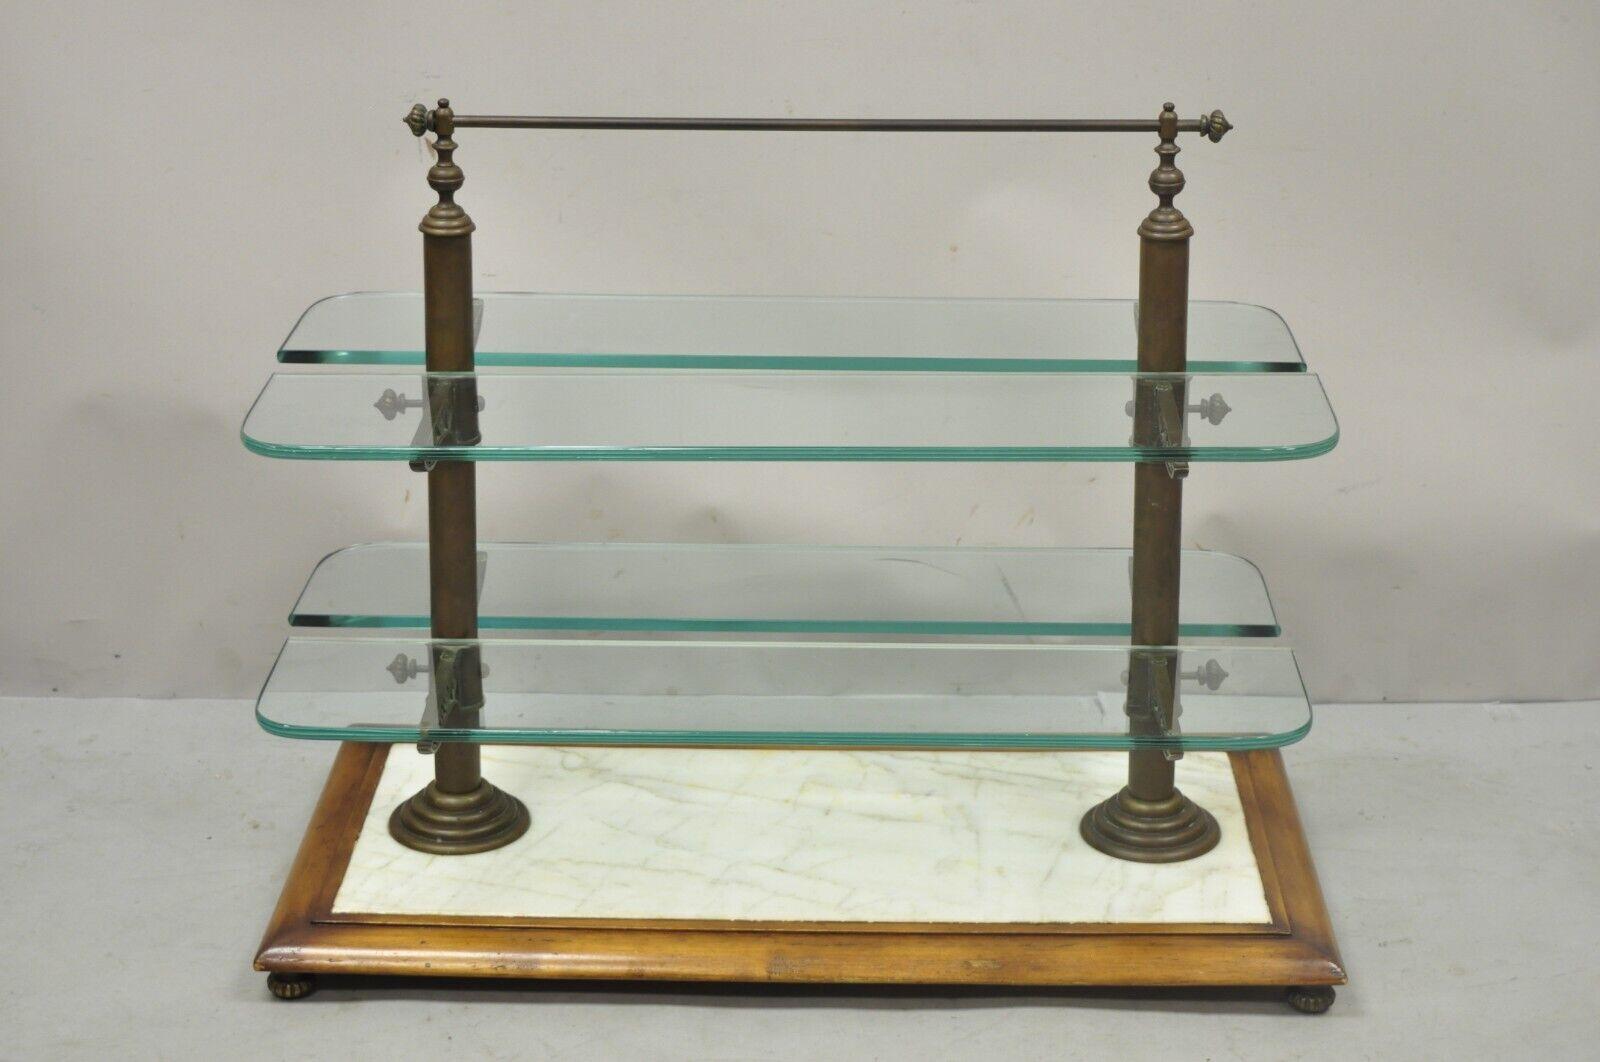 Vintage French Country Walnut Marble and Bronze Patisserie Pastry Shelf Display Stand. Item features adjustable height shelves, marble surface, raised on bronze feet, bronze and brass painted hardware, solid wood base, 4 thick curved glass shelves,